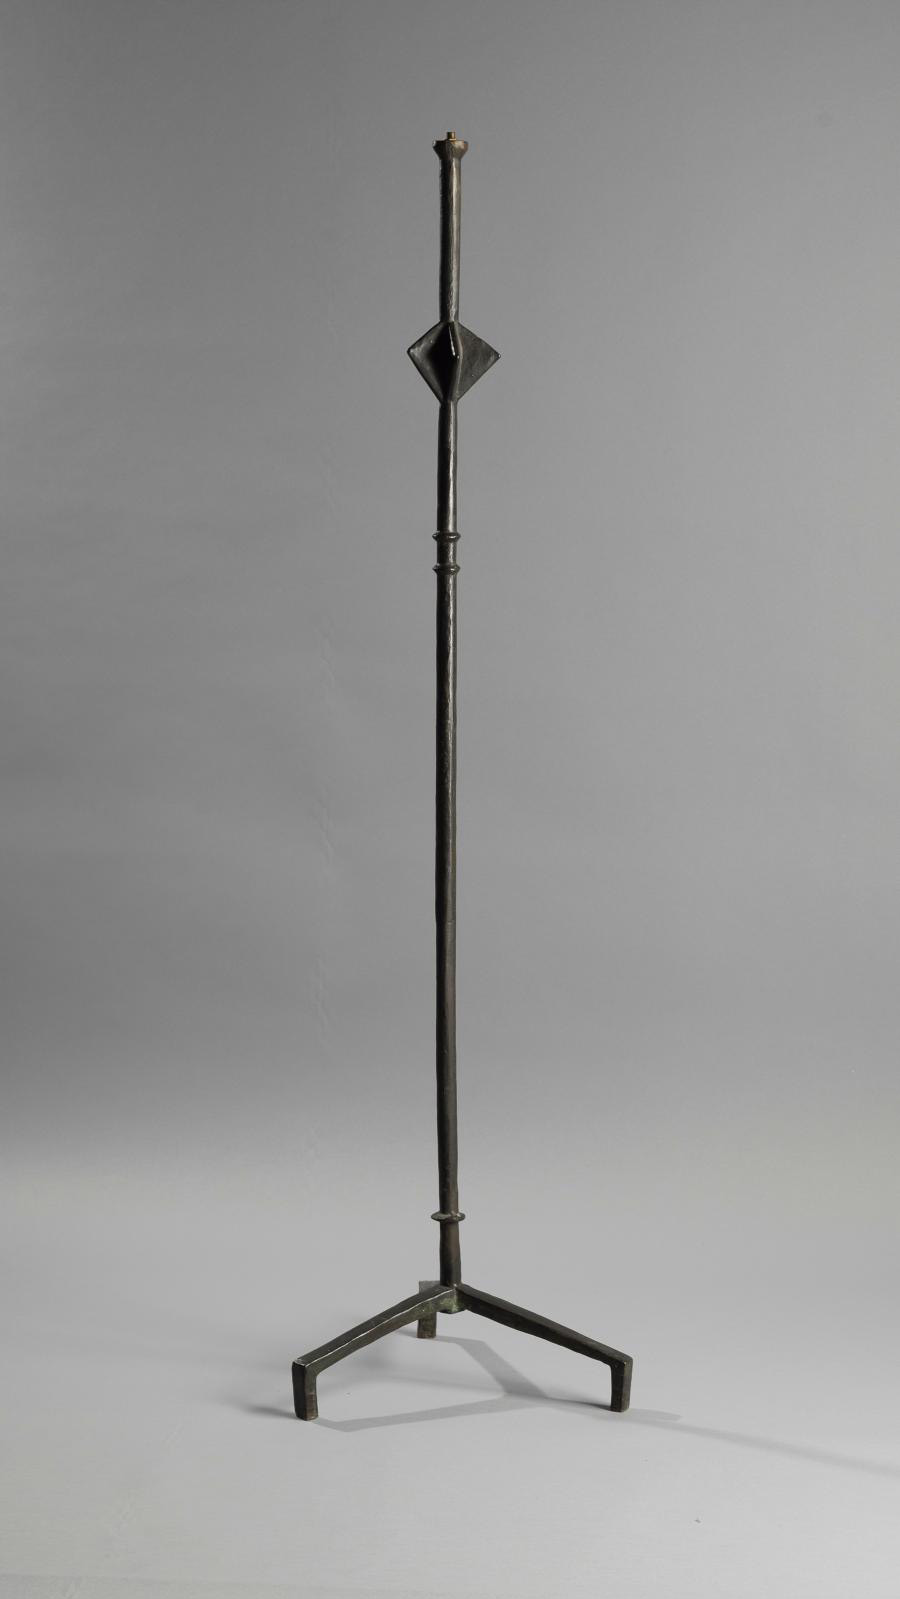 Alberto Giacometti (1901-1966), "Star" floor lamp base, model created in c. 1936, bronze proof with brown-black patina and subtle hints of antique green, monogrammed and numbered AG 042 on the foot by the Giacometti Committee, h. 148.7 cm/58.8 in. Result: €241,800